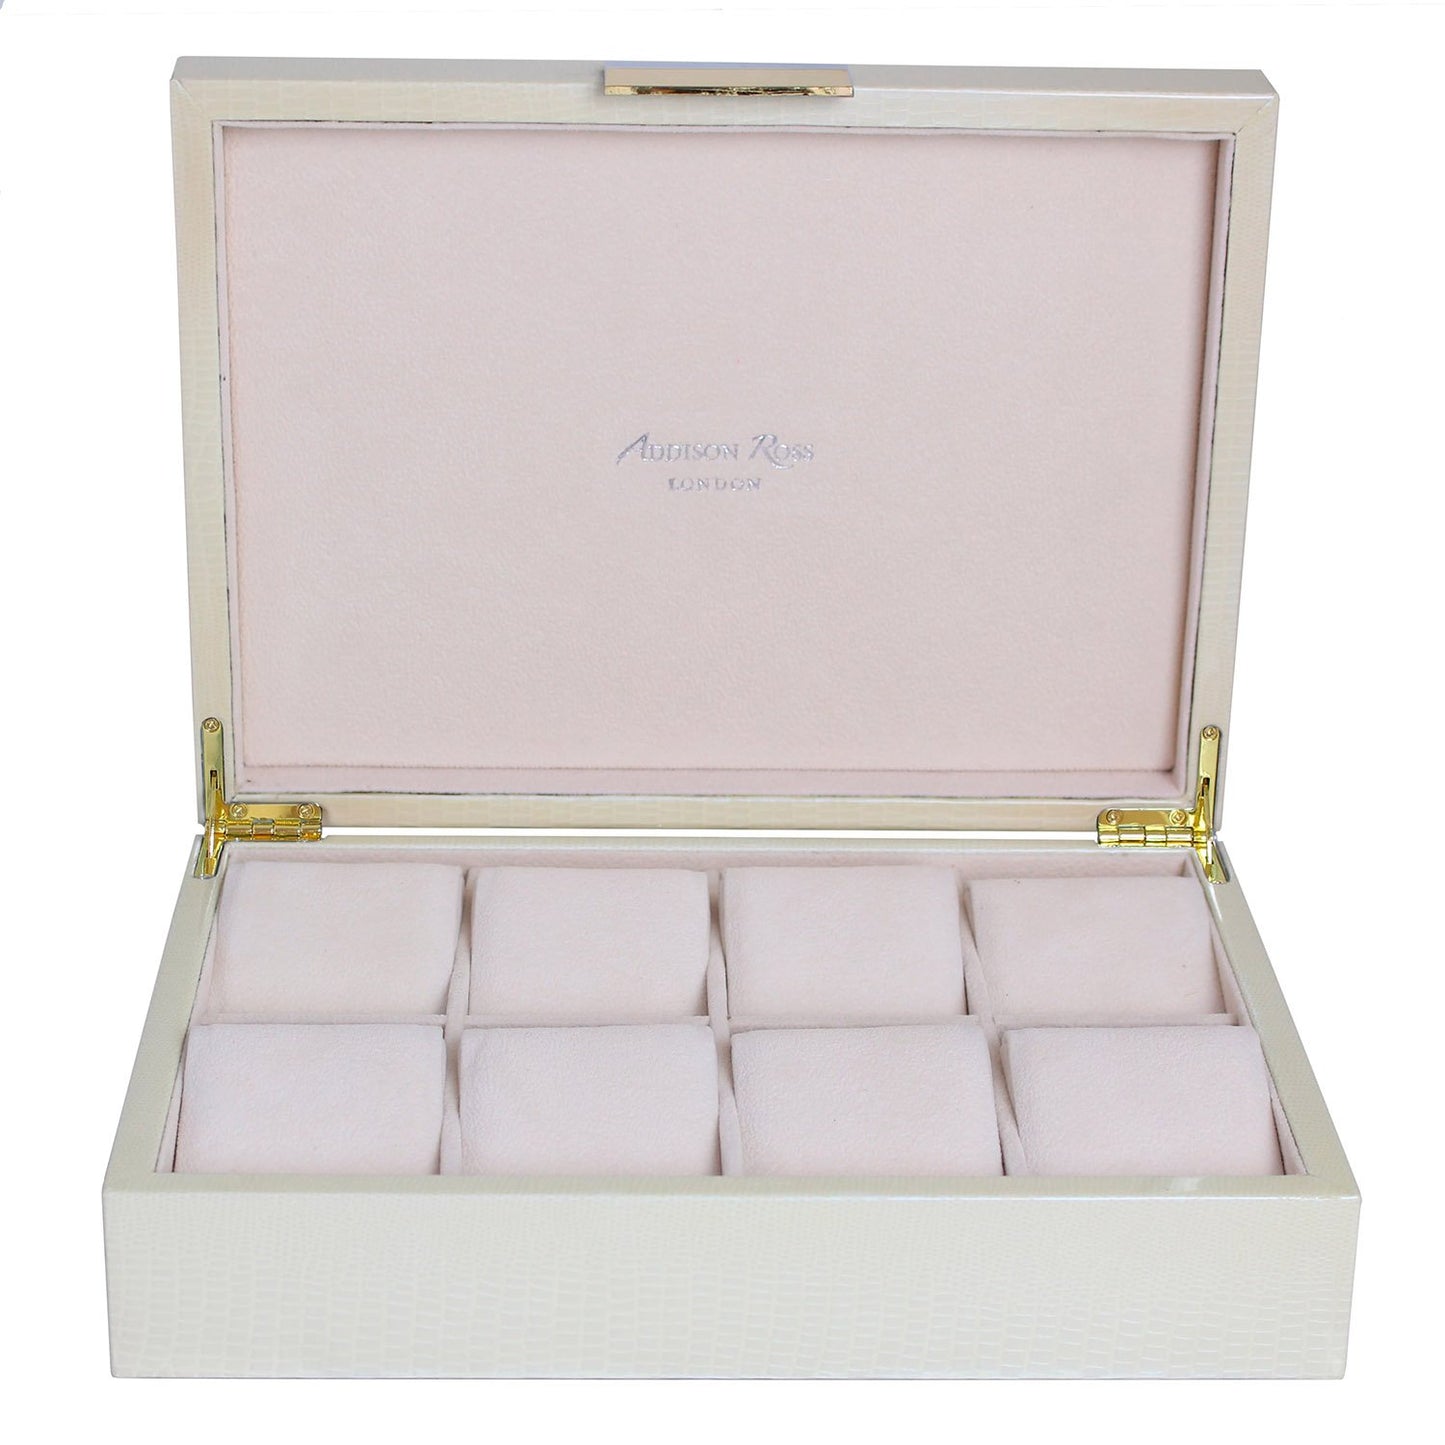 Large cream watch box with suede interior